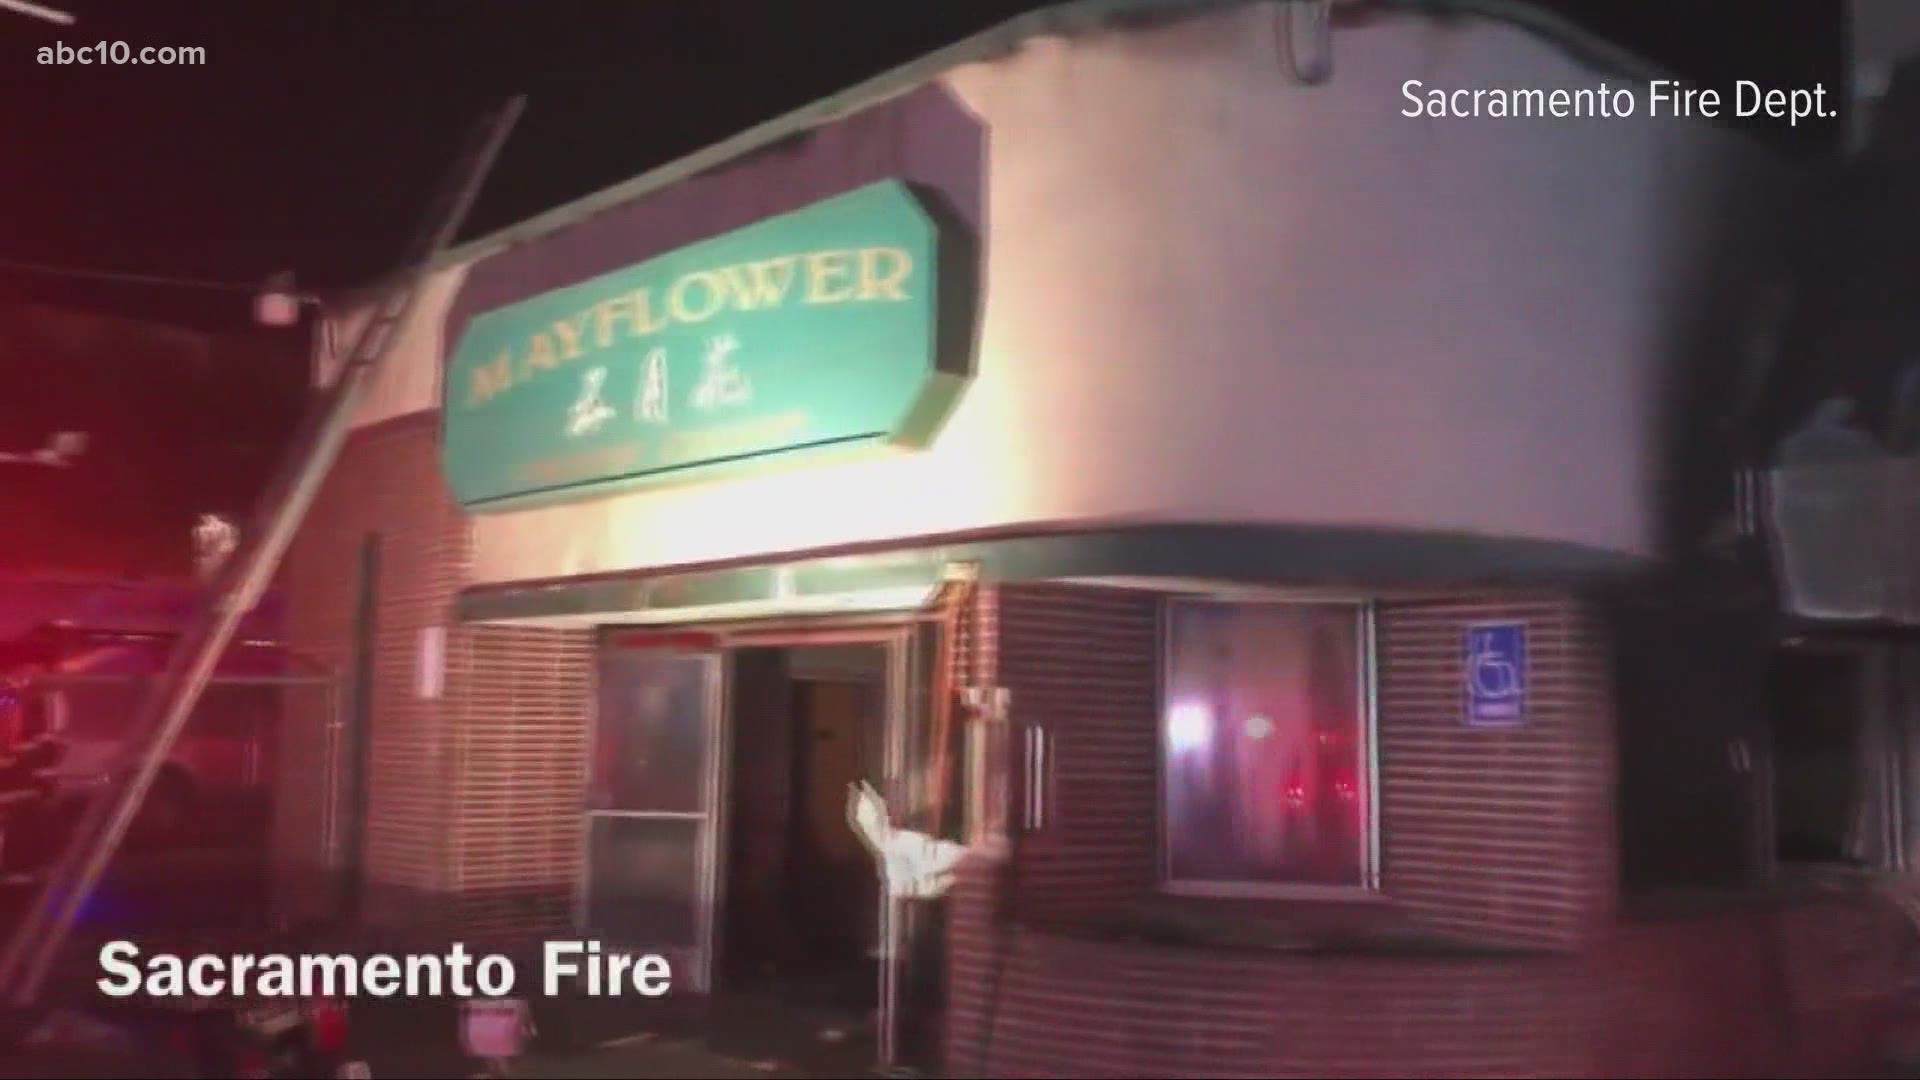 Firefighters said the person died in a two-alarm fire in the building that was once the 'Mayflower Chinese Cuisine' restaurant at Alhambra Blvd and L St.